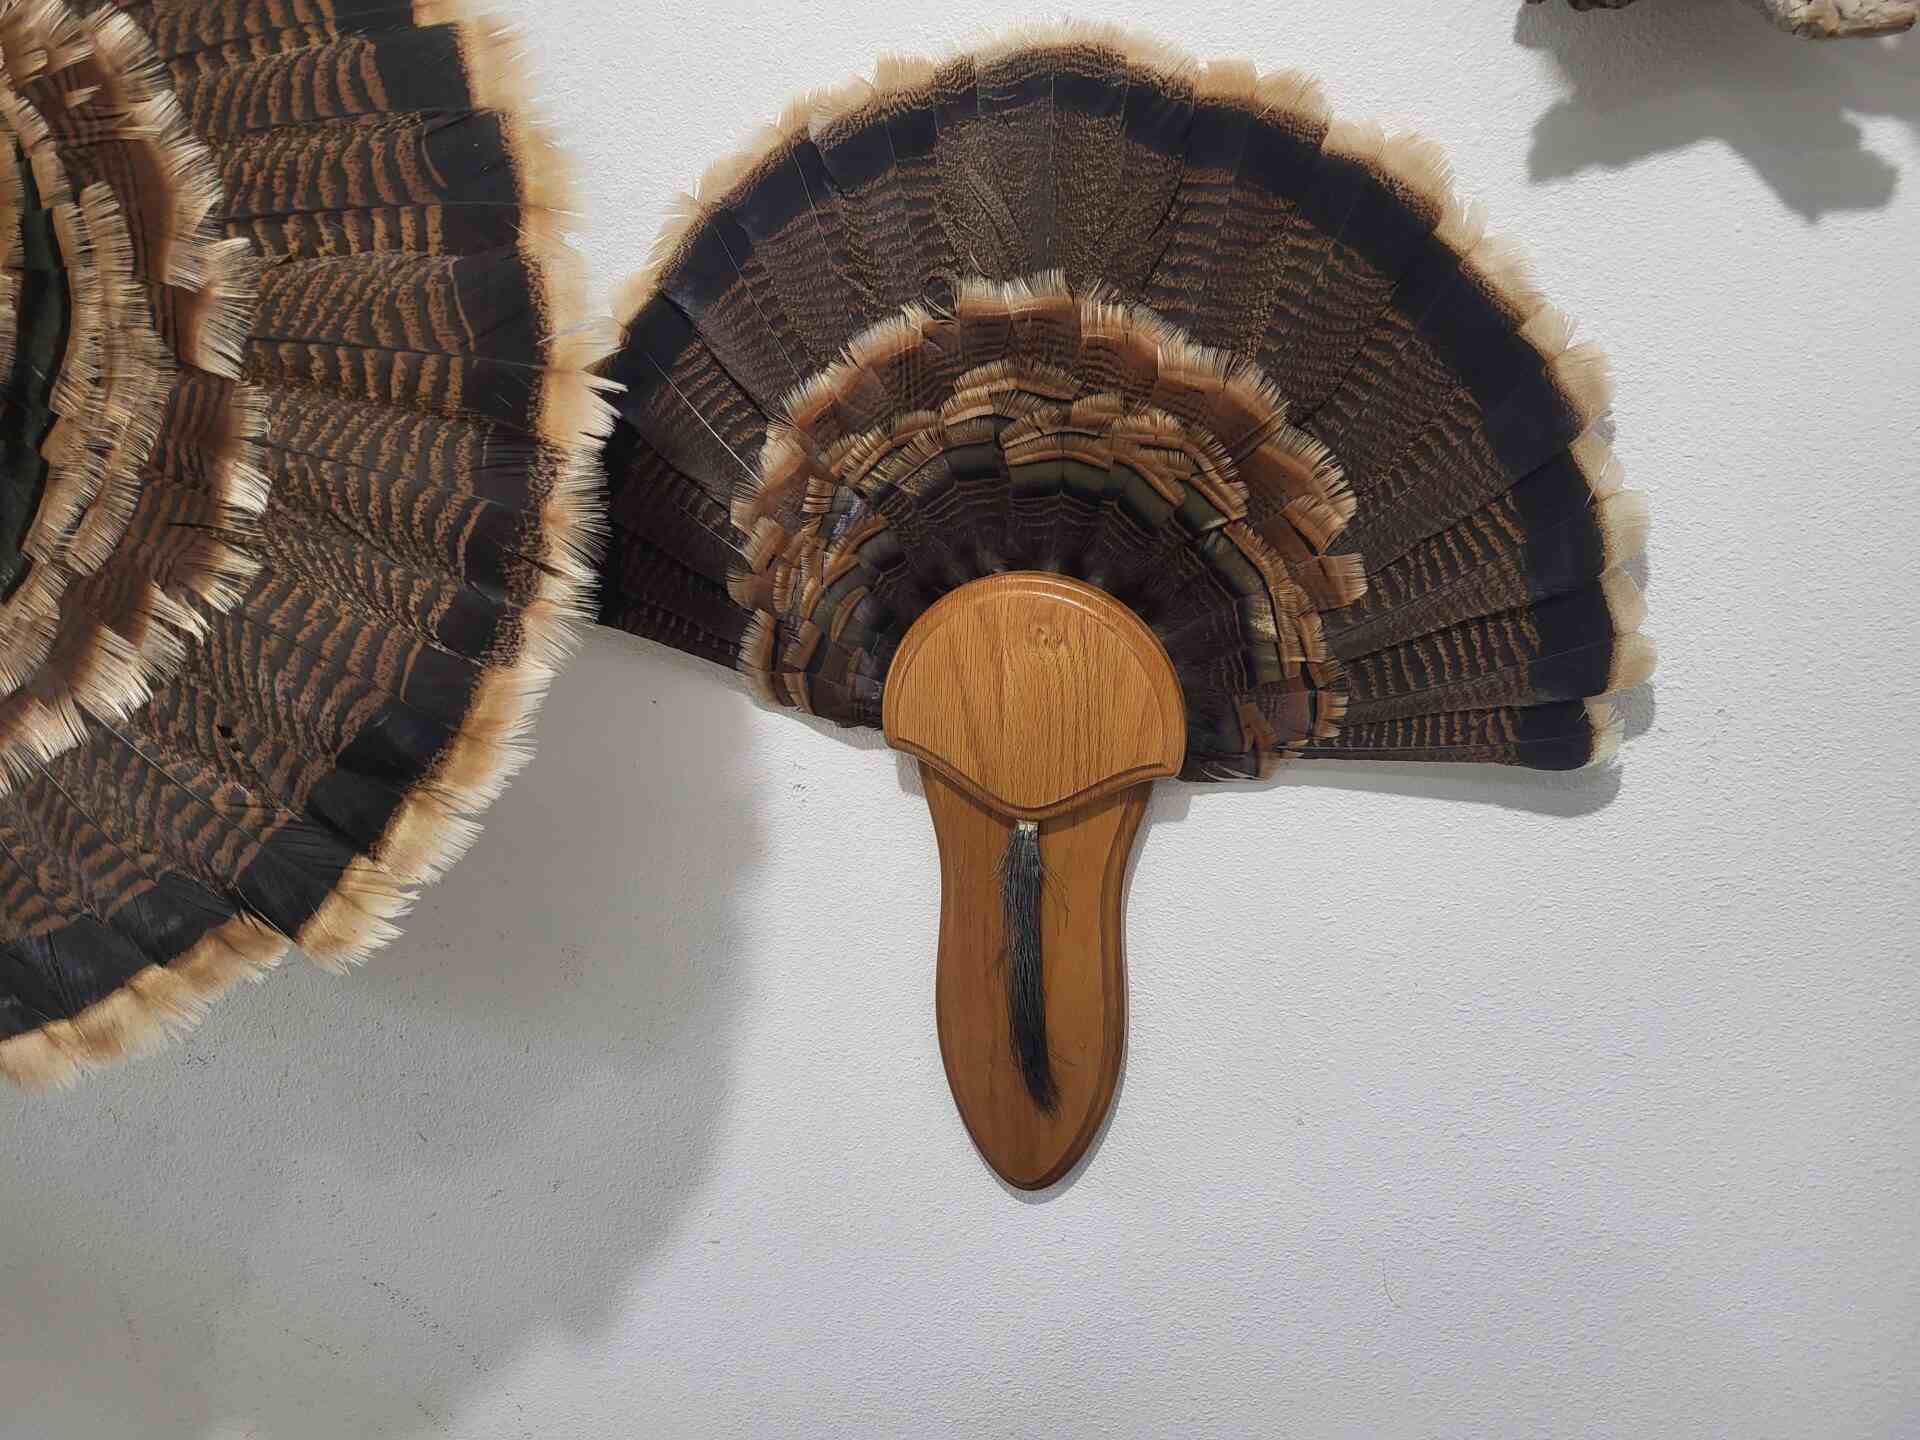 Feathers of the turkey hen hanging on the wall